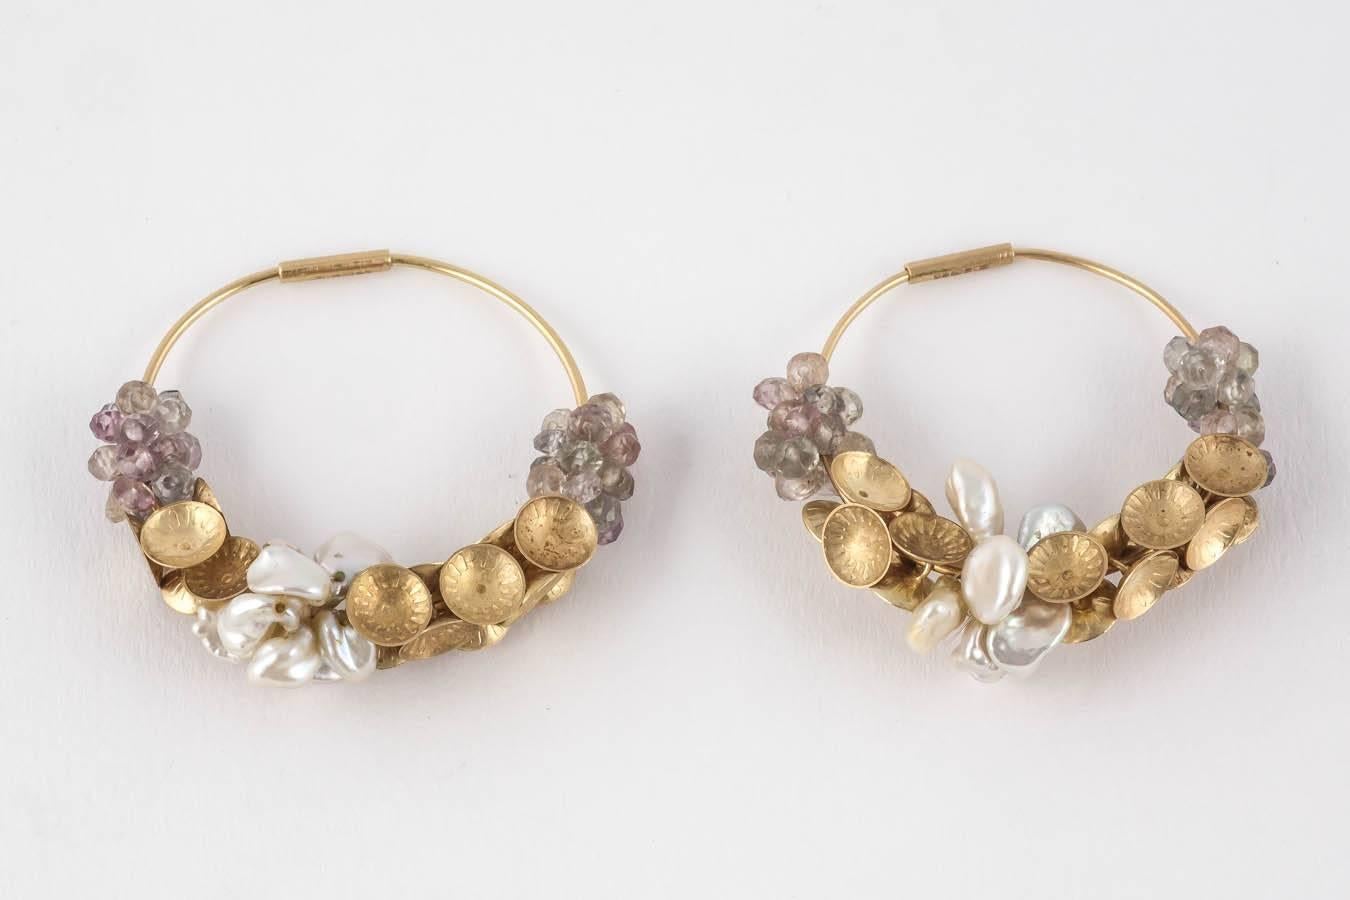 18ct Matt Gold Donna Brennan Hoop Earrings. Enchantedly encrusted with Sapphires, Freshwater Pearls & gold disks, these elegant earrings evoke the timeless appeal of Antiquity.

Donna's work typically features jewellery & sculpturally wrapped